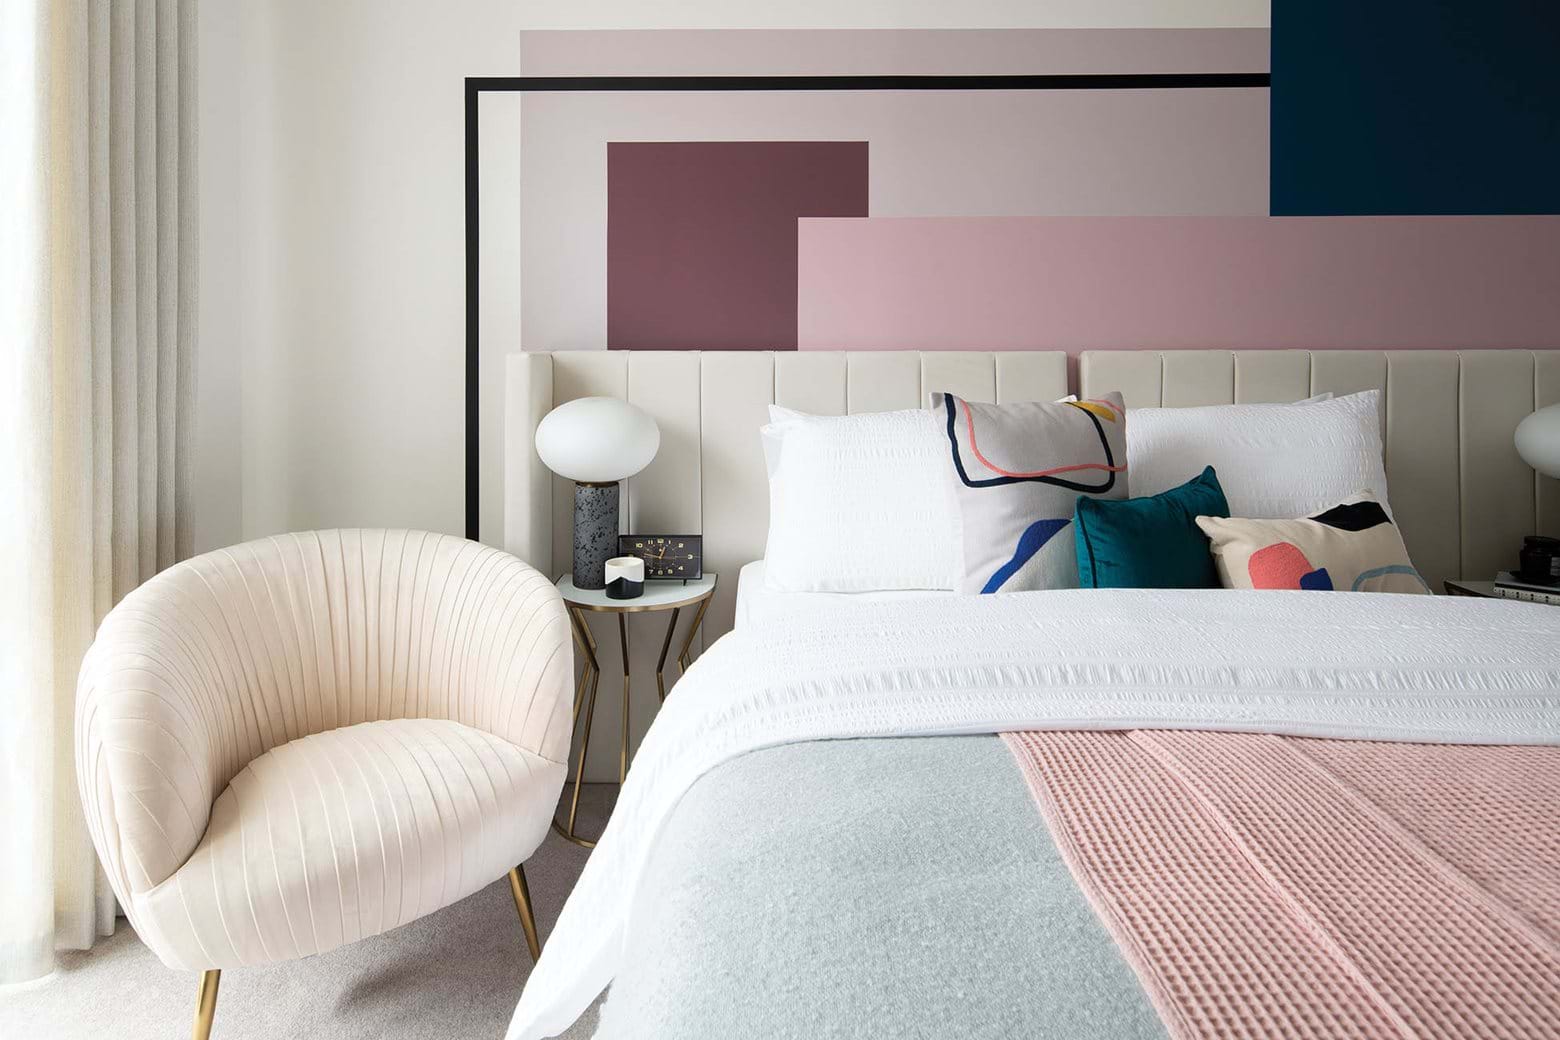 Use of colours can help make a room look bigger.